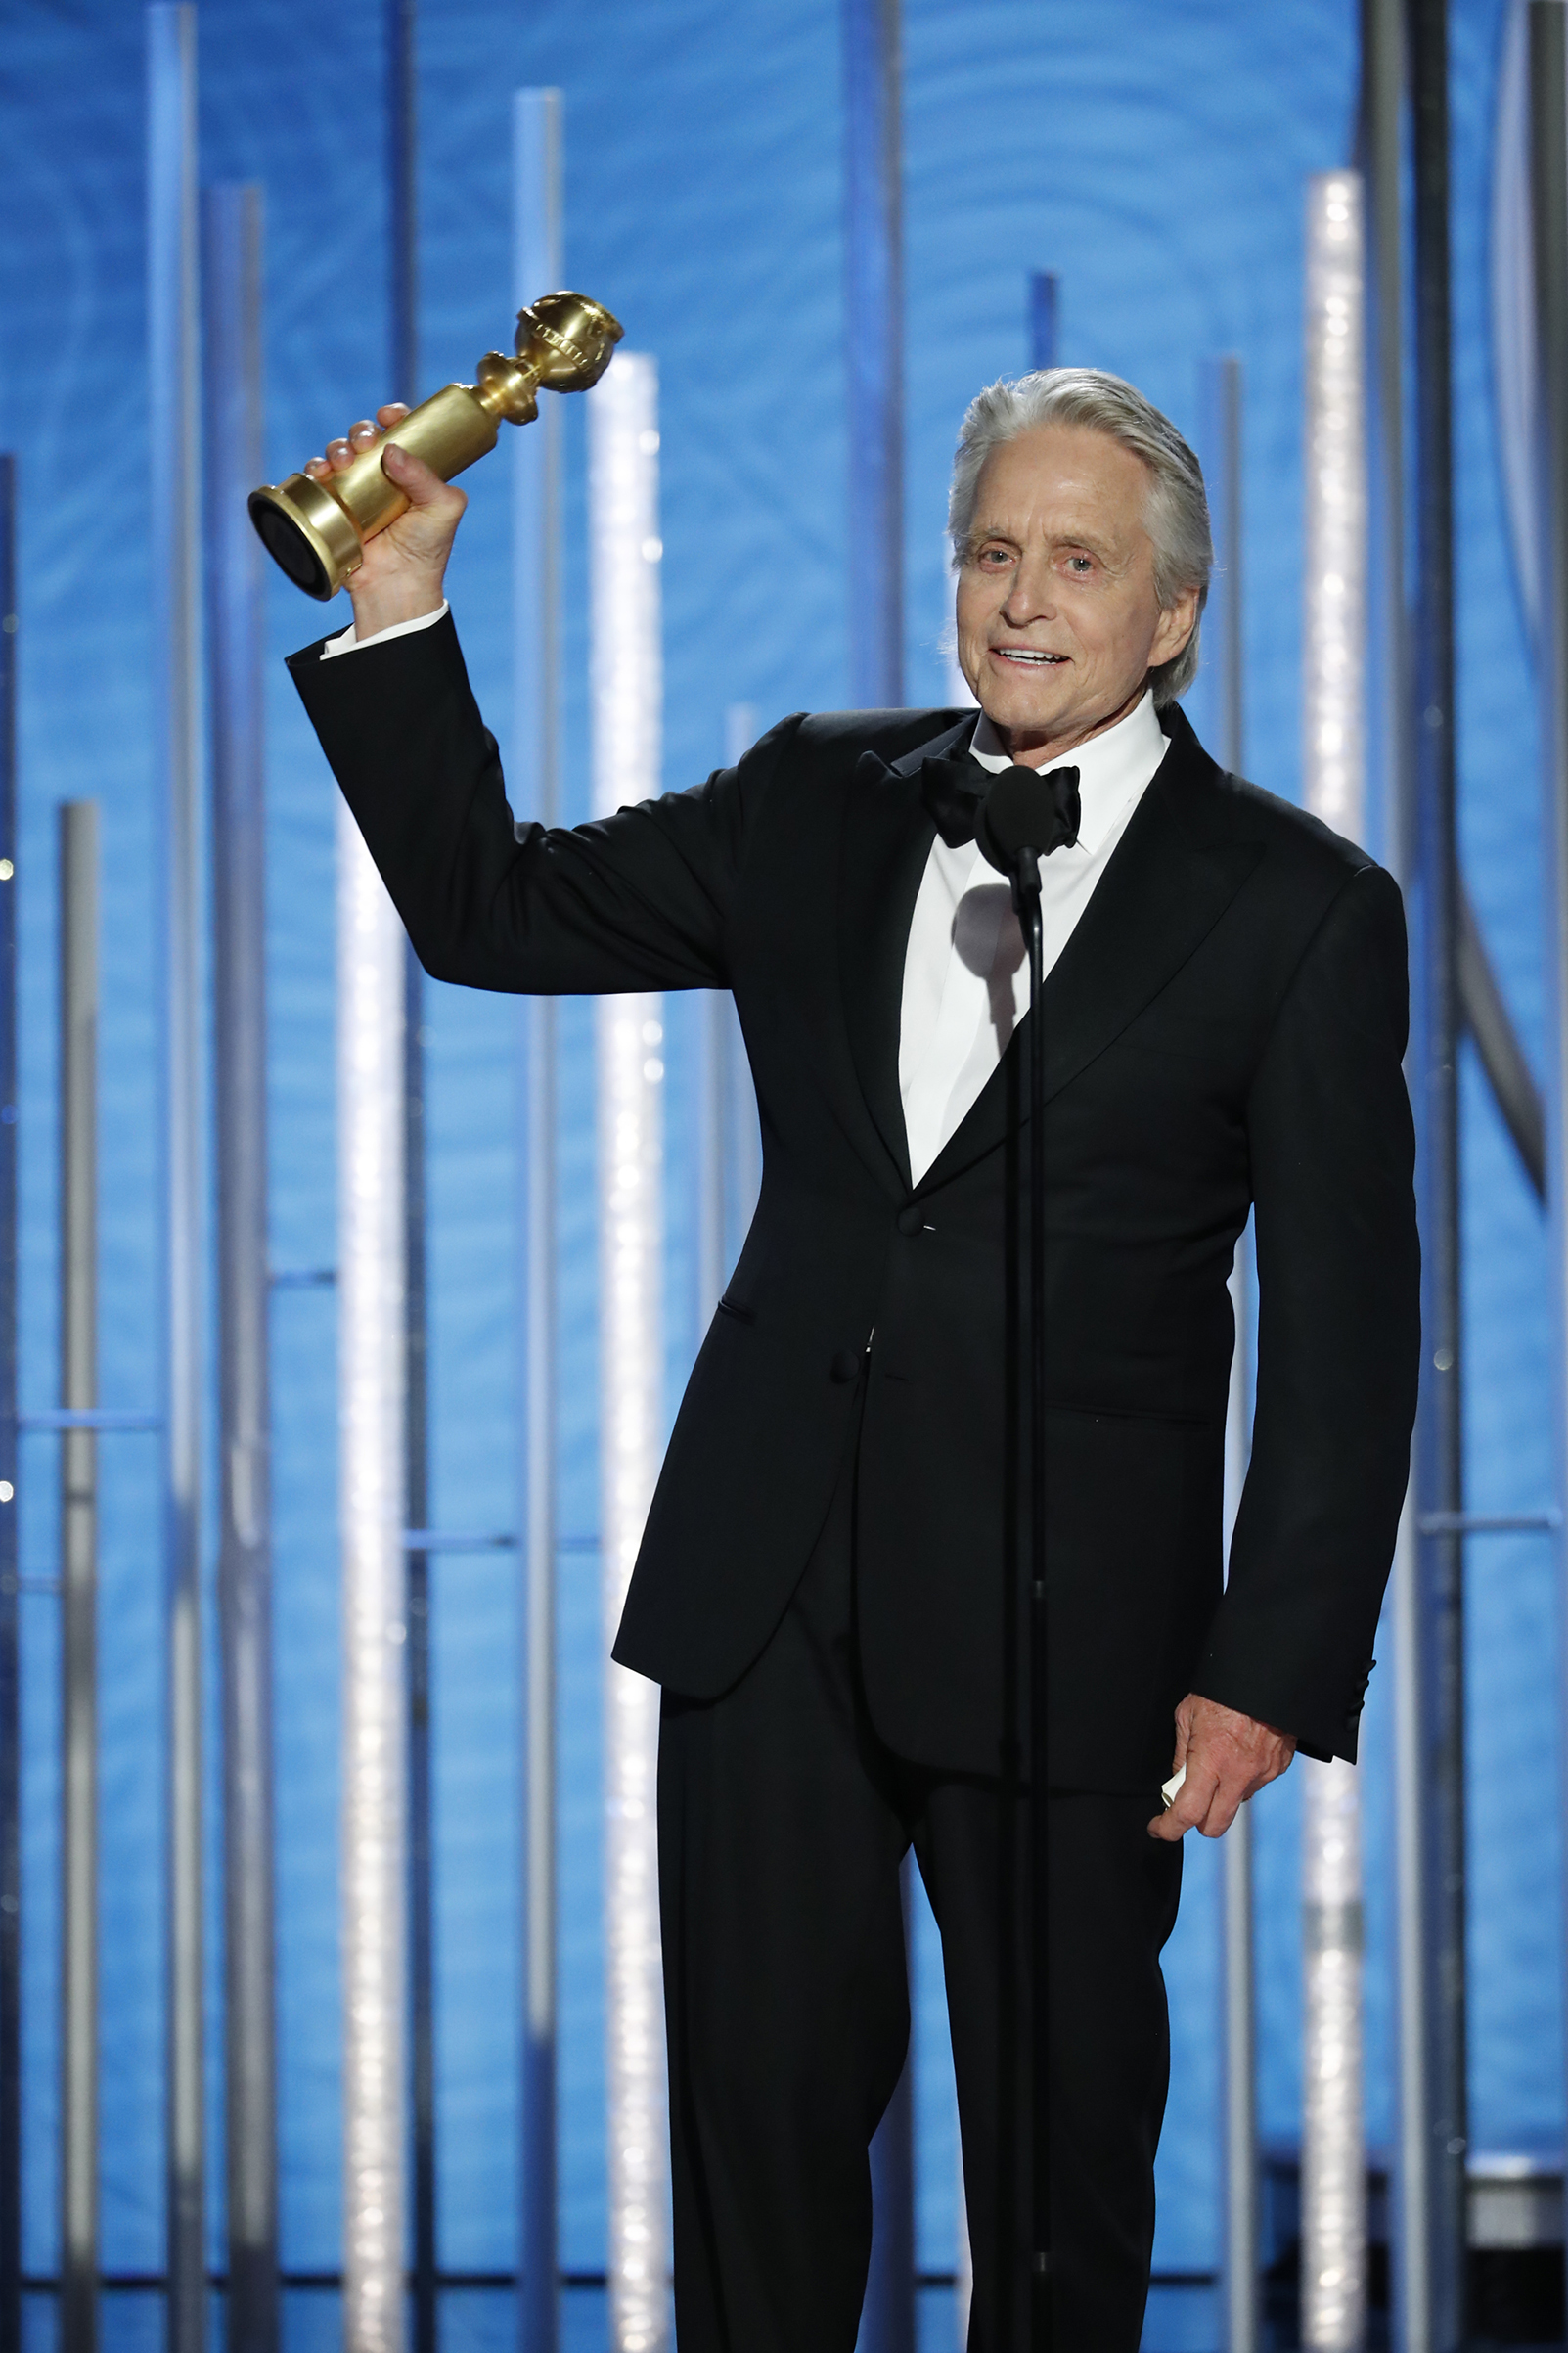 Michael Douglas from the “The Kominsky Method” accepts the Best Performance by an Actor in a Television Series – Musical or Comedy award onstage during the 76th Annual Golden Globe Awards.